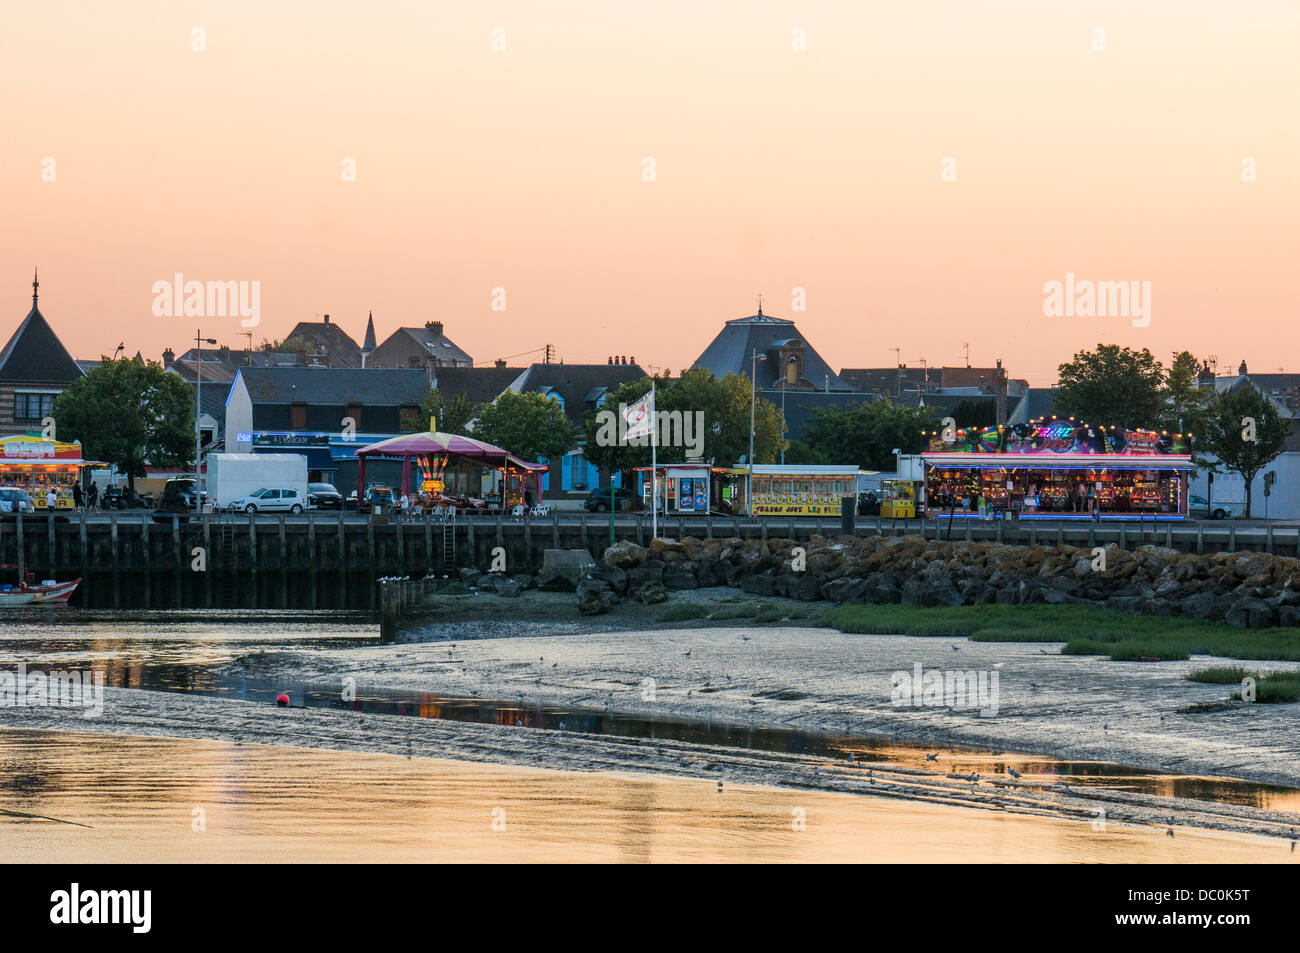 A view at dusk of the amusement arcades at in the coastal town of Le Crotoy, in the Somme department in Picardie, northern France, Europe. Stock Photo